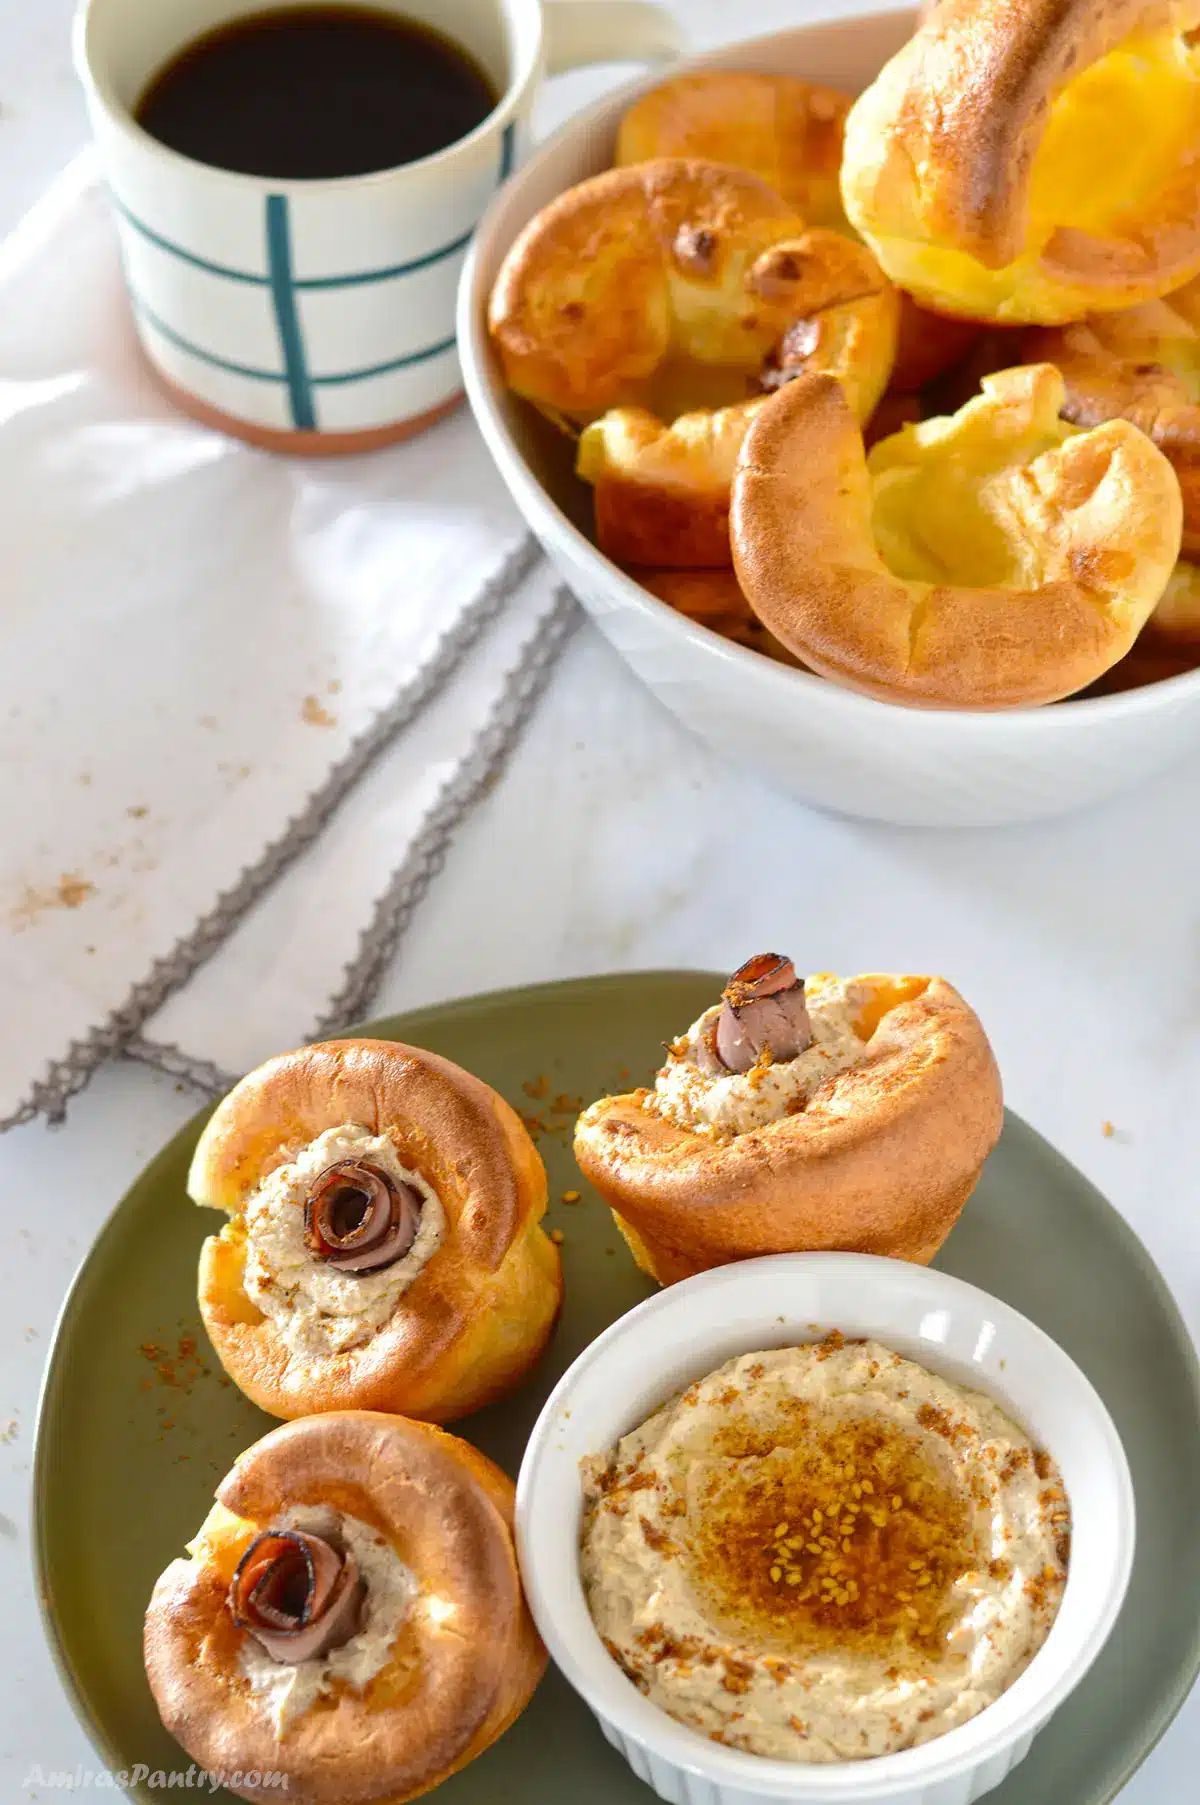 A top view of a breakfast table with yorkshire pudding filled with roast beef and cheese.